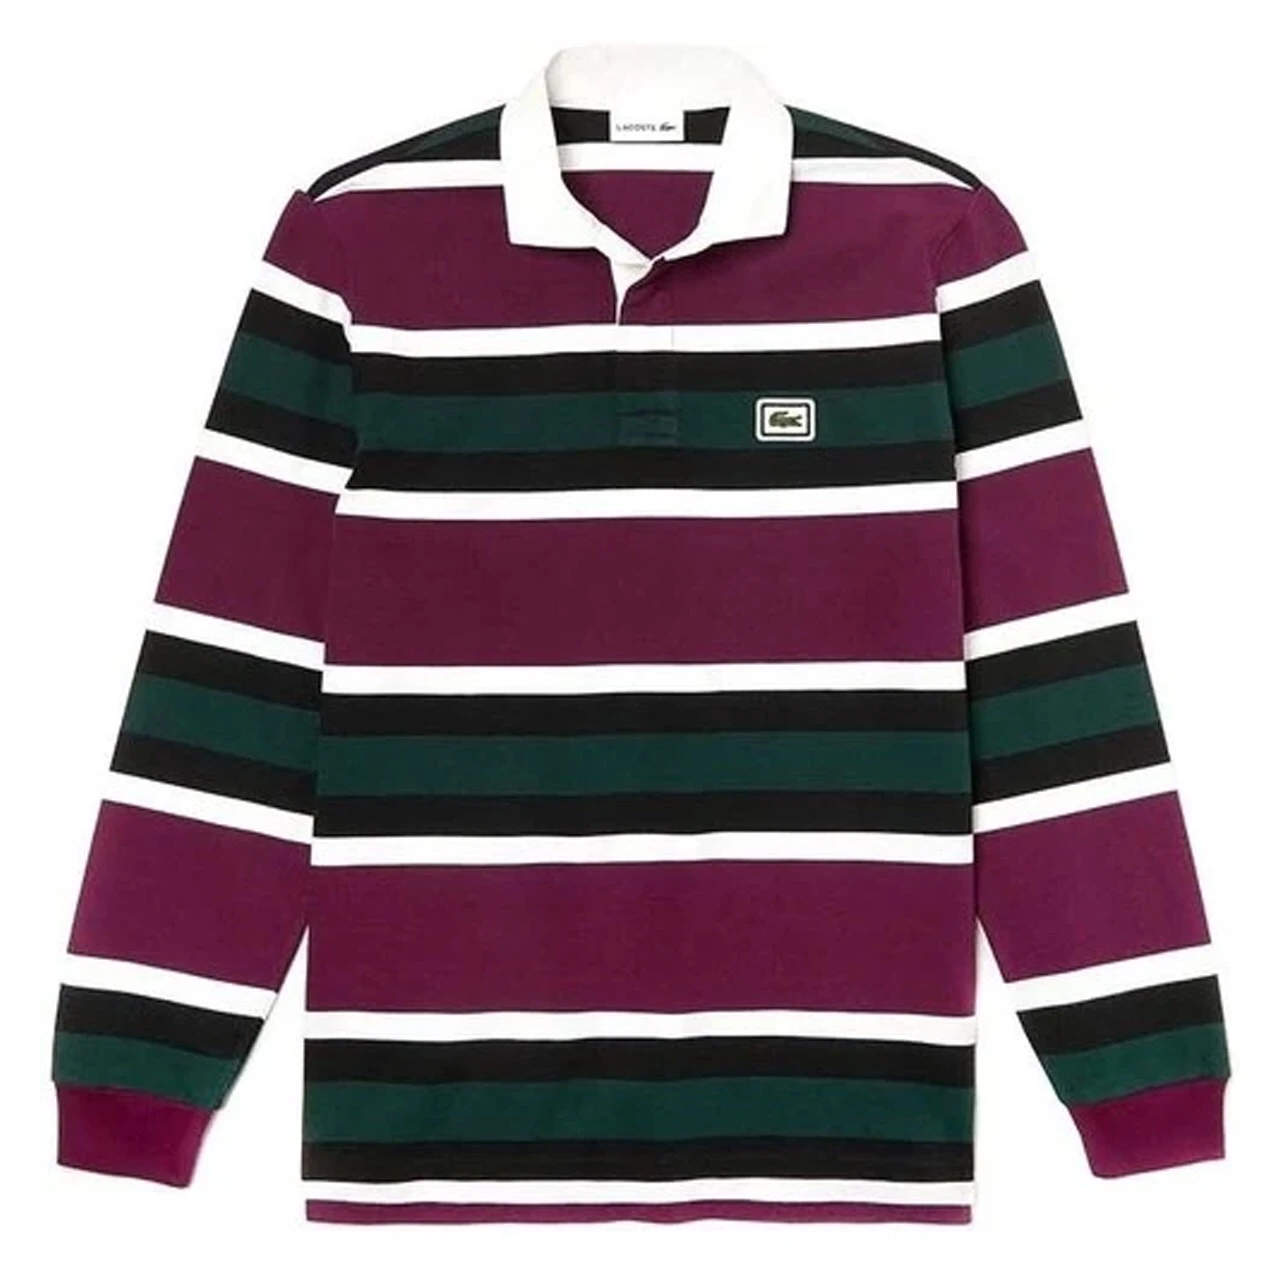 Striped Rugby Polo Shirt Bordeaux Kh 8633